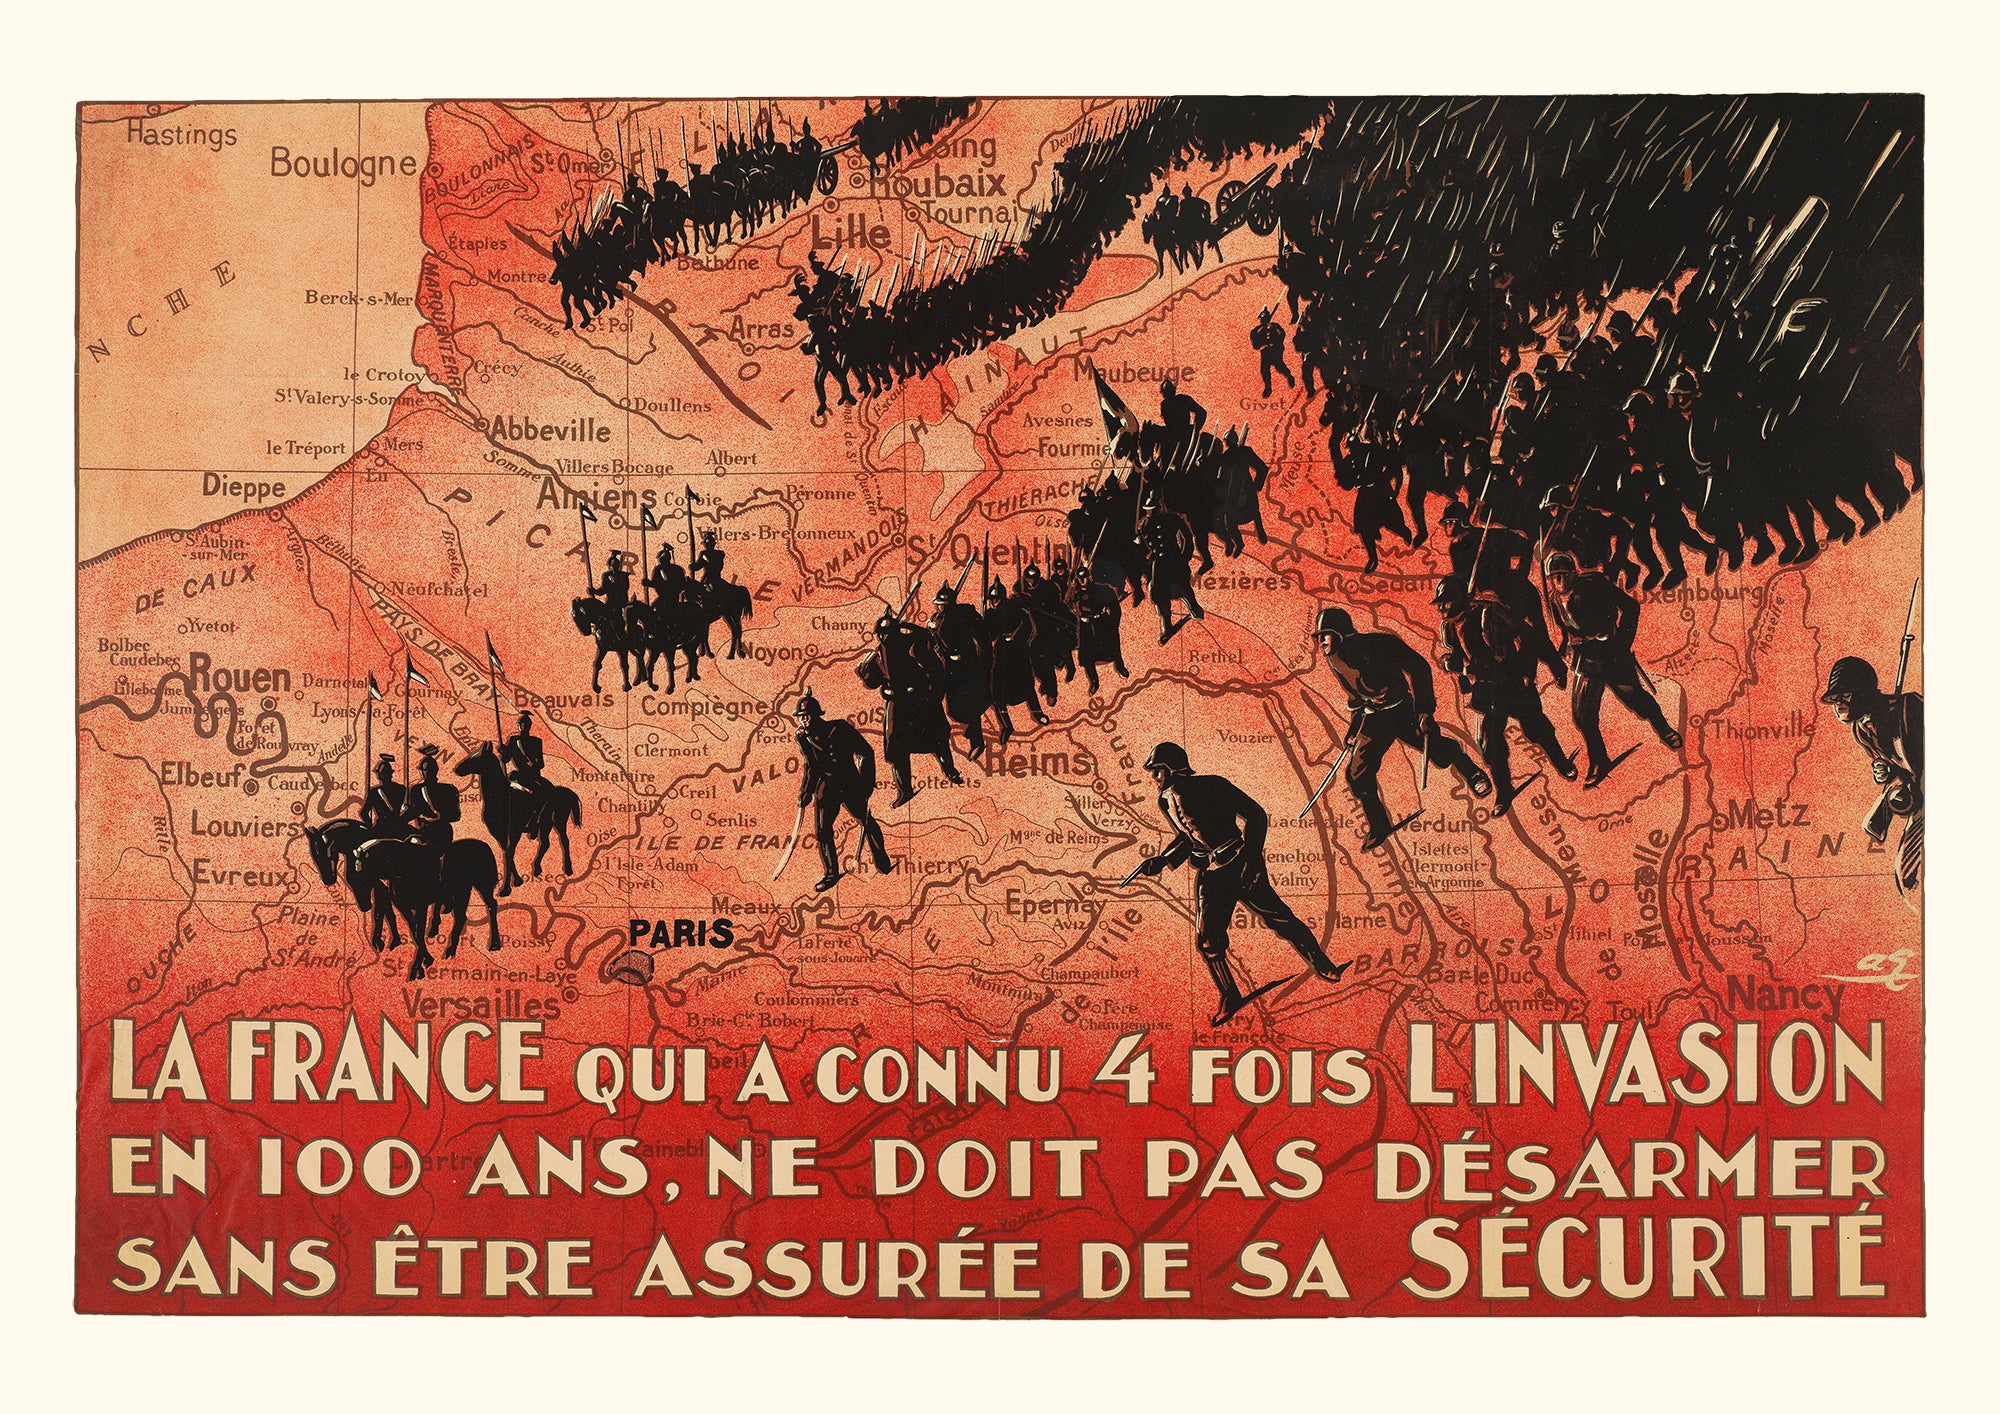 France, which has experienced invasion 4 times in 100 years, must not disarmed without being assured of its security — French poster